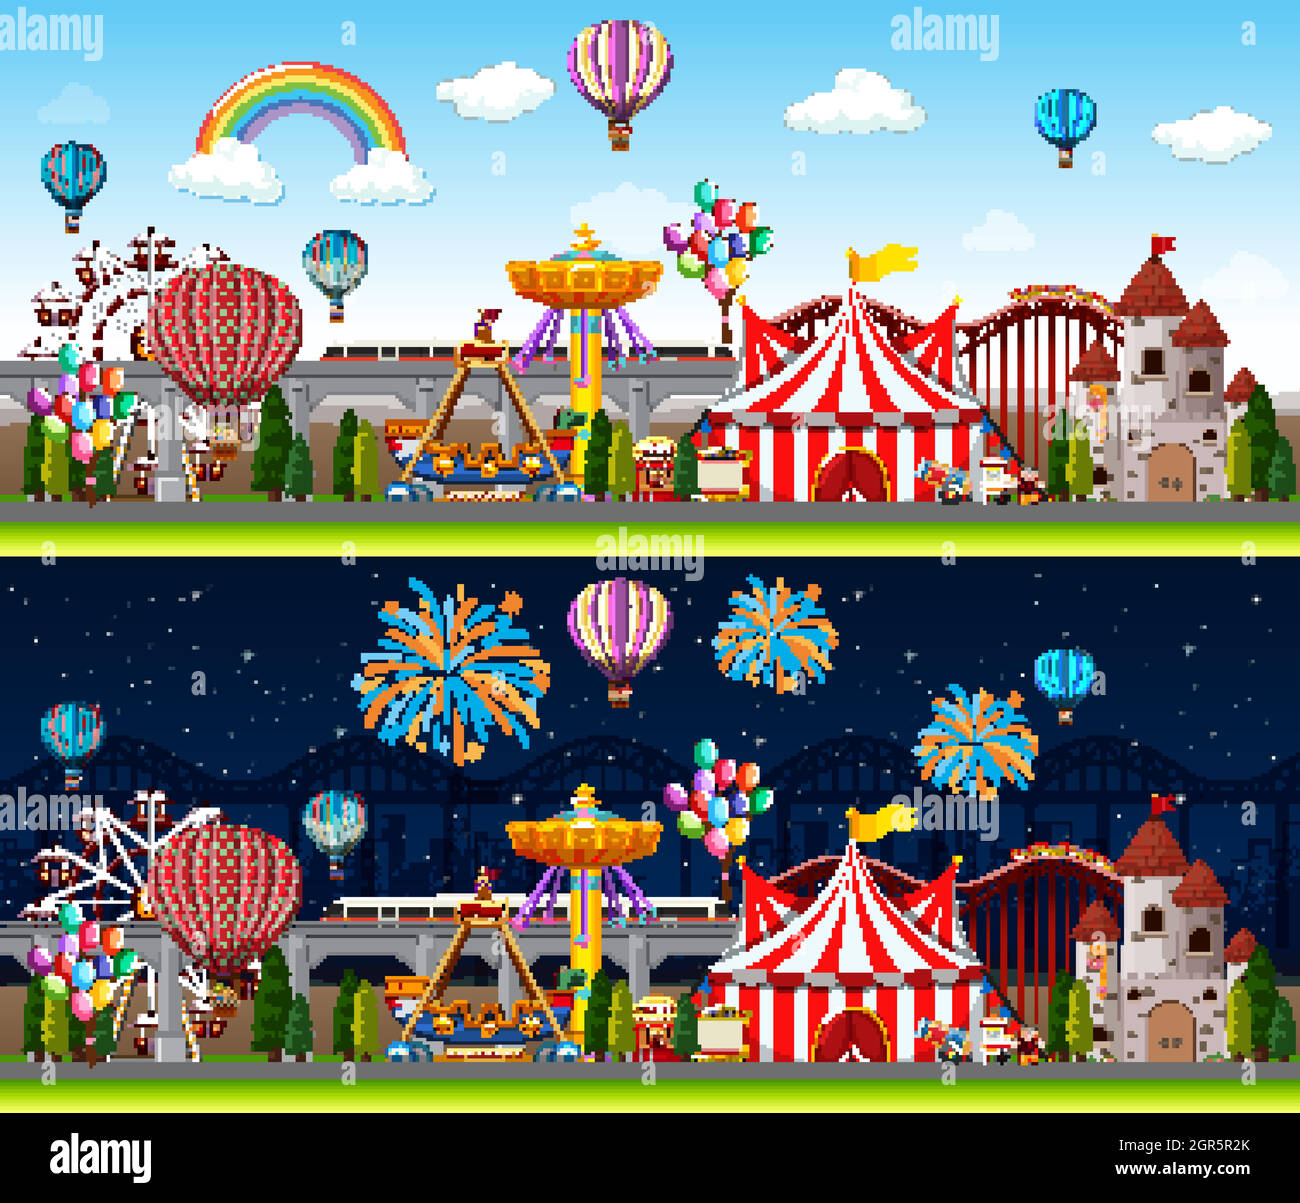 Themepark scenes with many rides at day time and night time Stock Vector